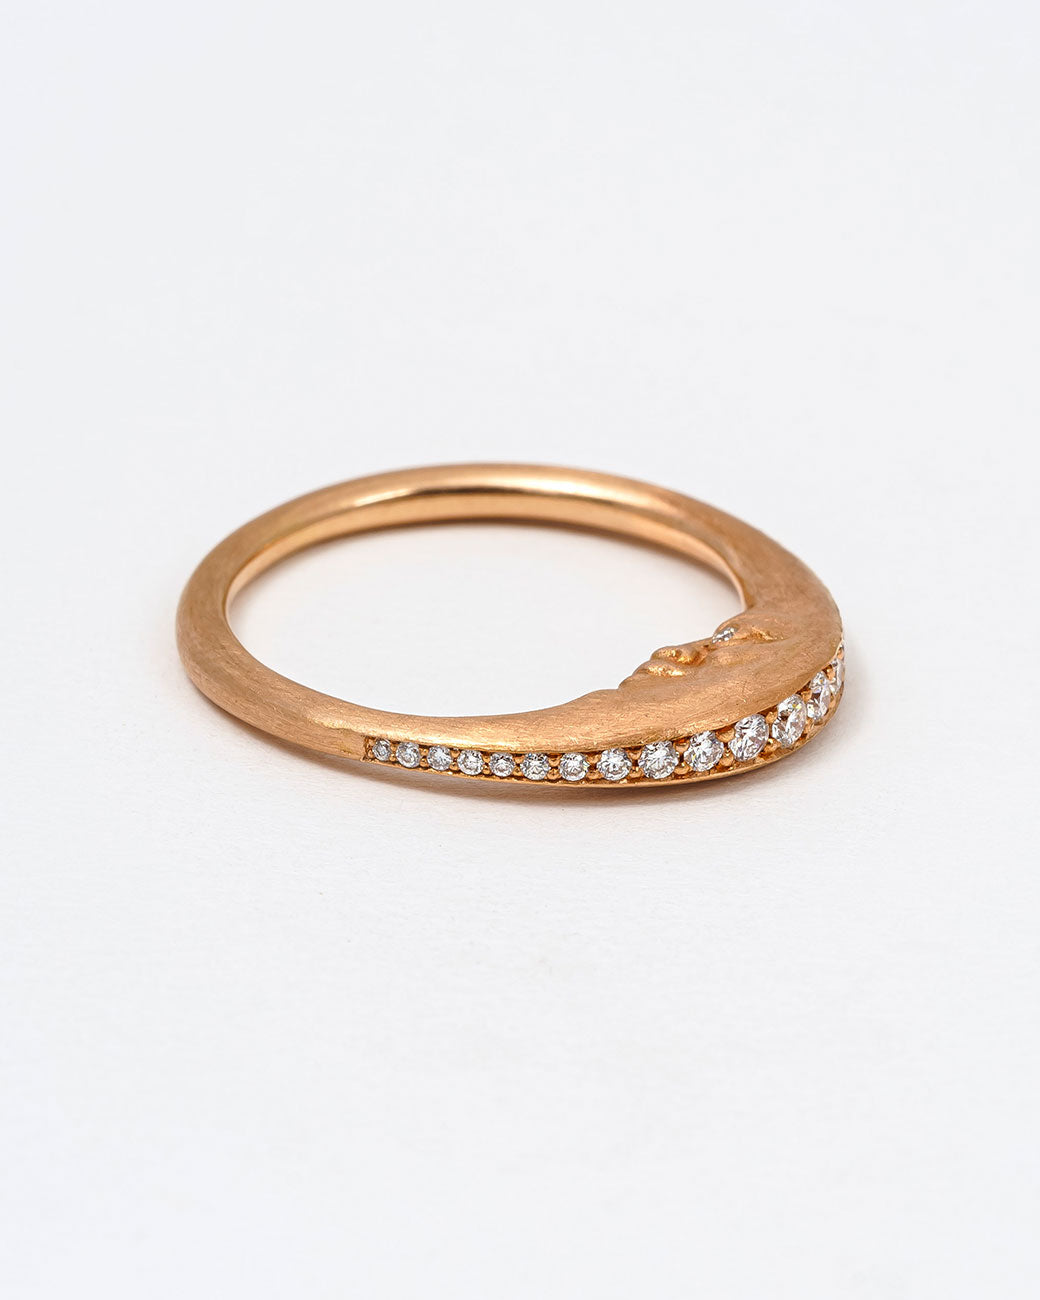 18k rose gold crescent moon ring by Anthony Lent with graduated white diamonds around the edge and a diamond eye, from the side.